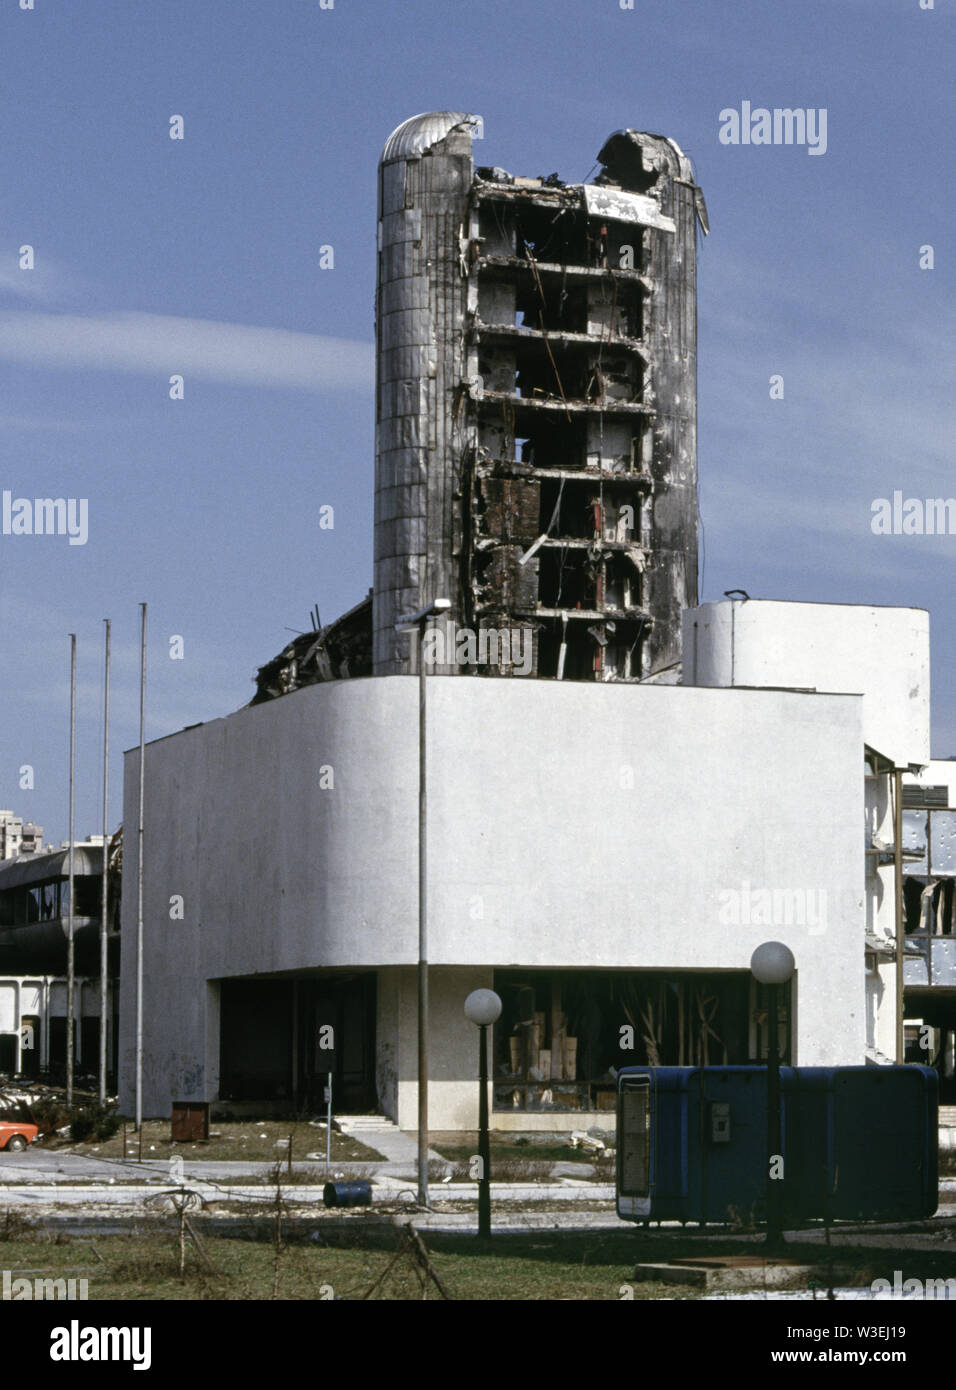 10th April 1993 During the Siege of Sarajevo: the ruins of the ...